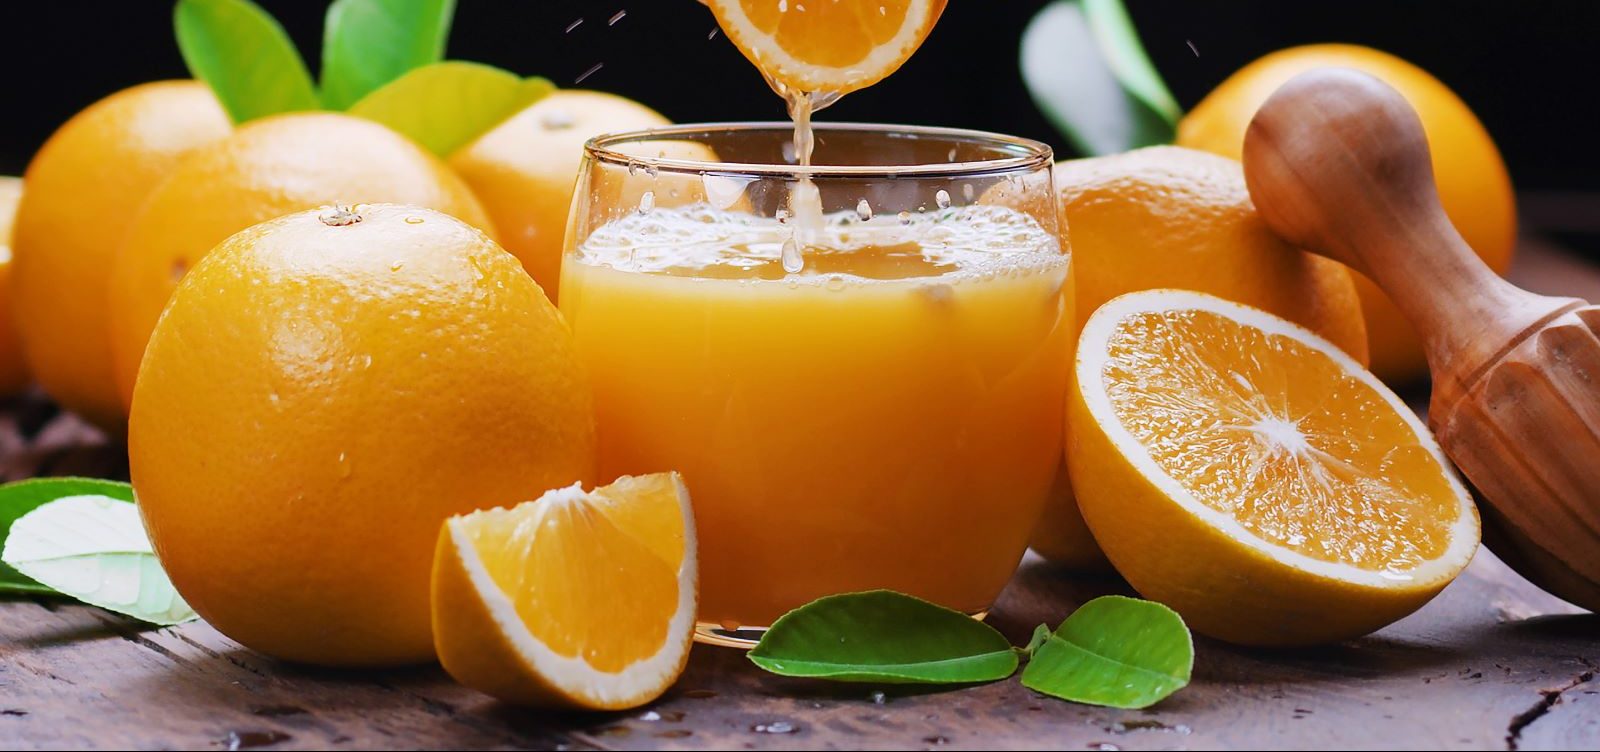 A dietitian breaks down the effects of processing orange juice, the nutrients it offers and the age-old pulp vs. no pulp debate.